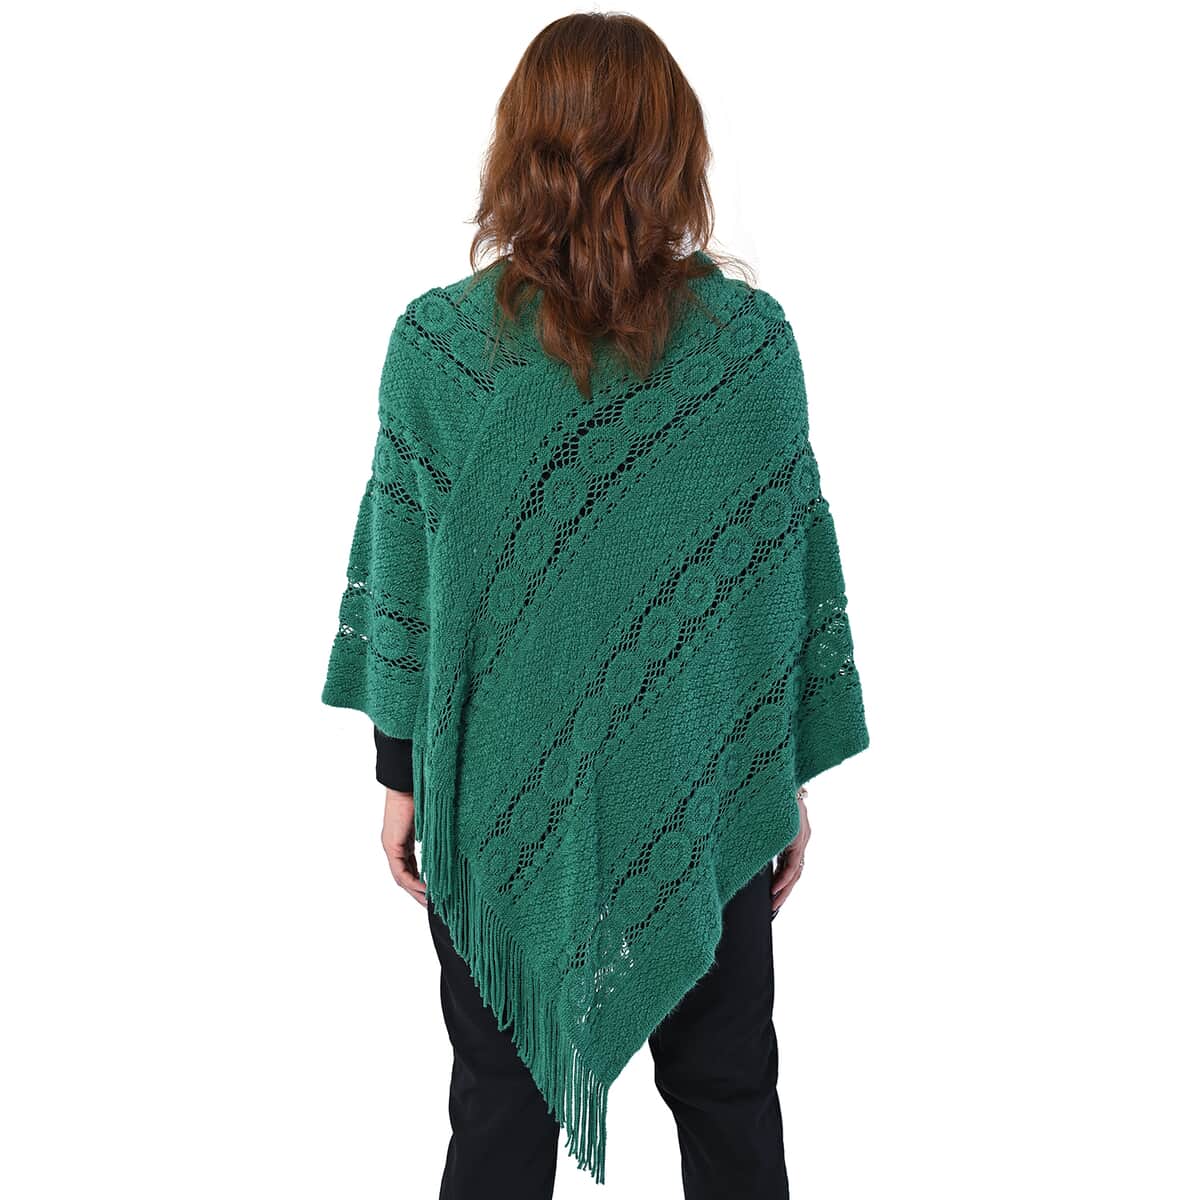 Green Diamond-Shaped Knitted Poncho with Beads (One Size Fits Most) image number 2